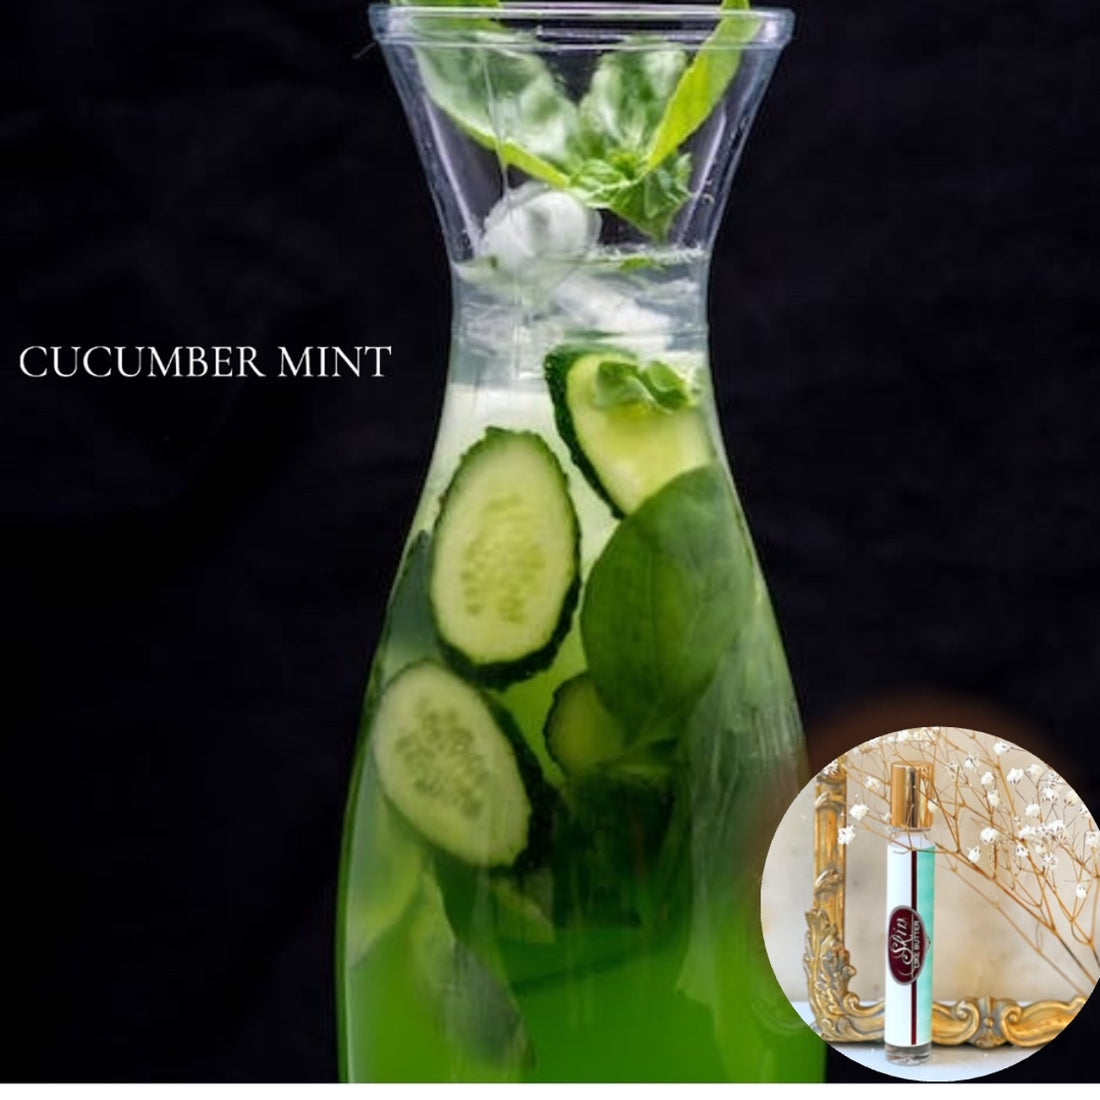 CUCUMBER MINT Roll On Travel Perfume in a Roll on or Spray bottle  - Buy 1 get 1 50% off-use coupon code 2PLEASE